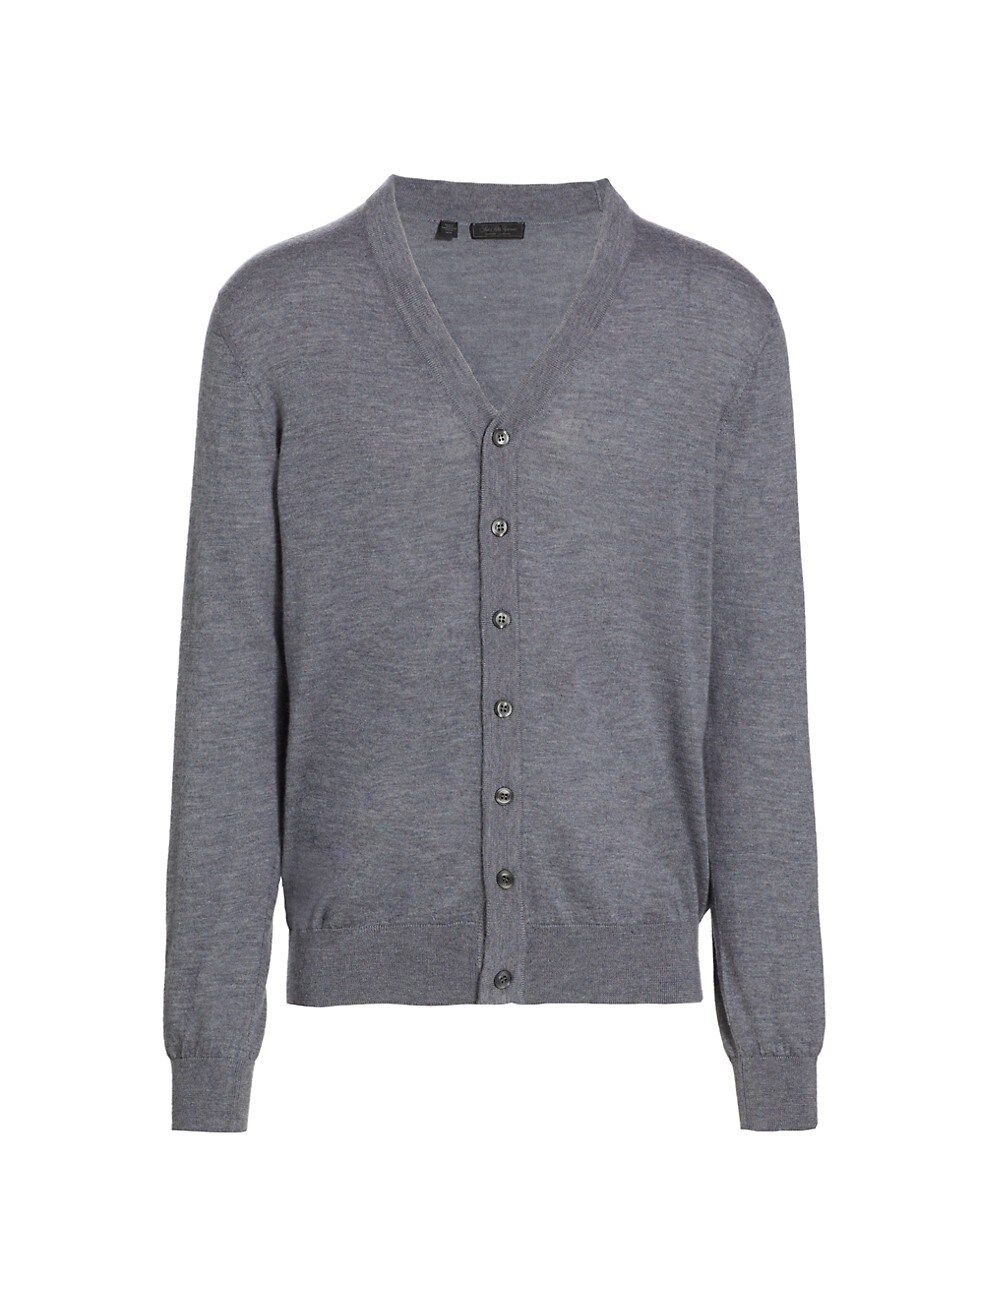 COLLECTION Lightweight Cashmere Cardigan | Saks Fifth Avenue